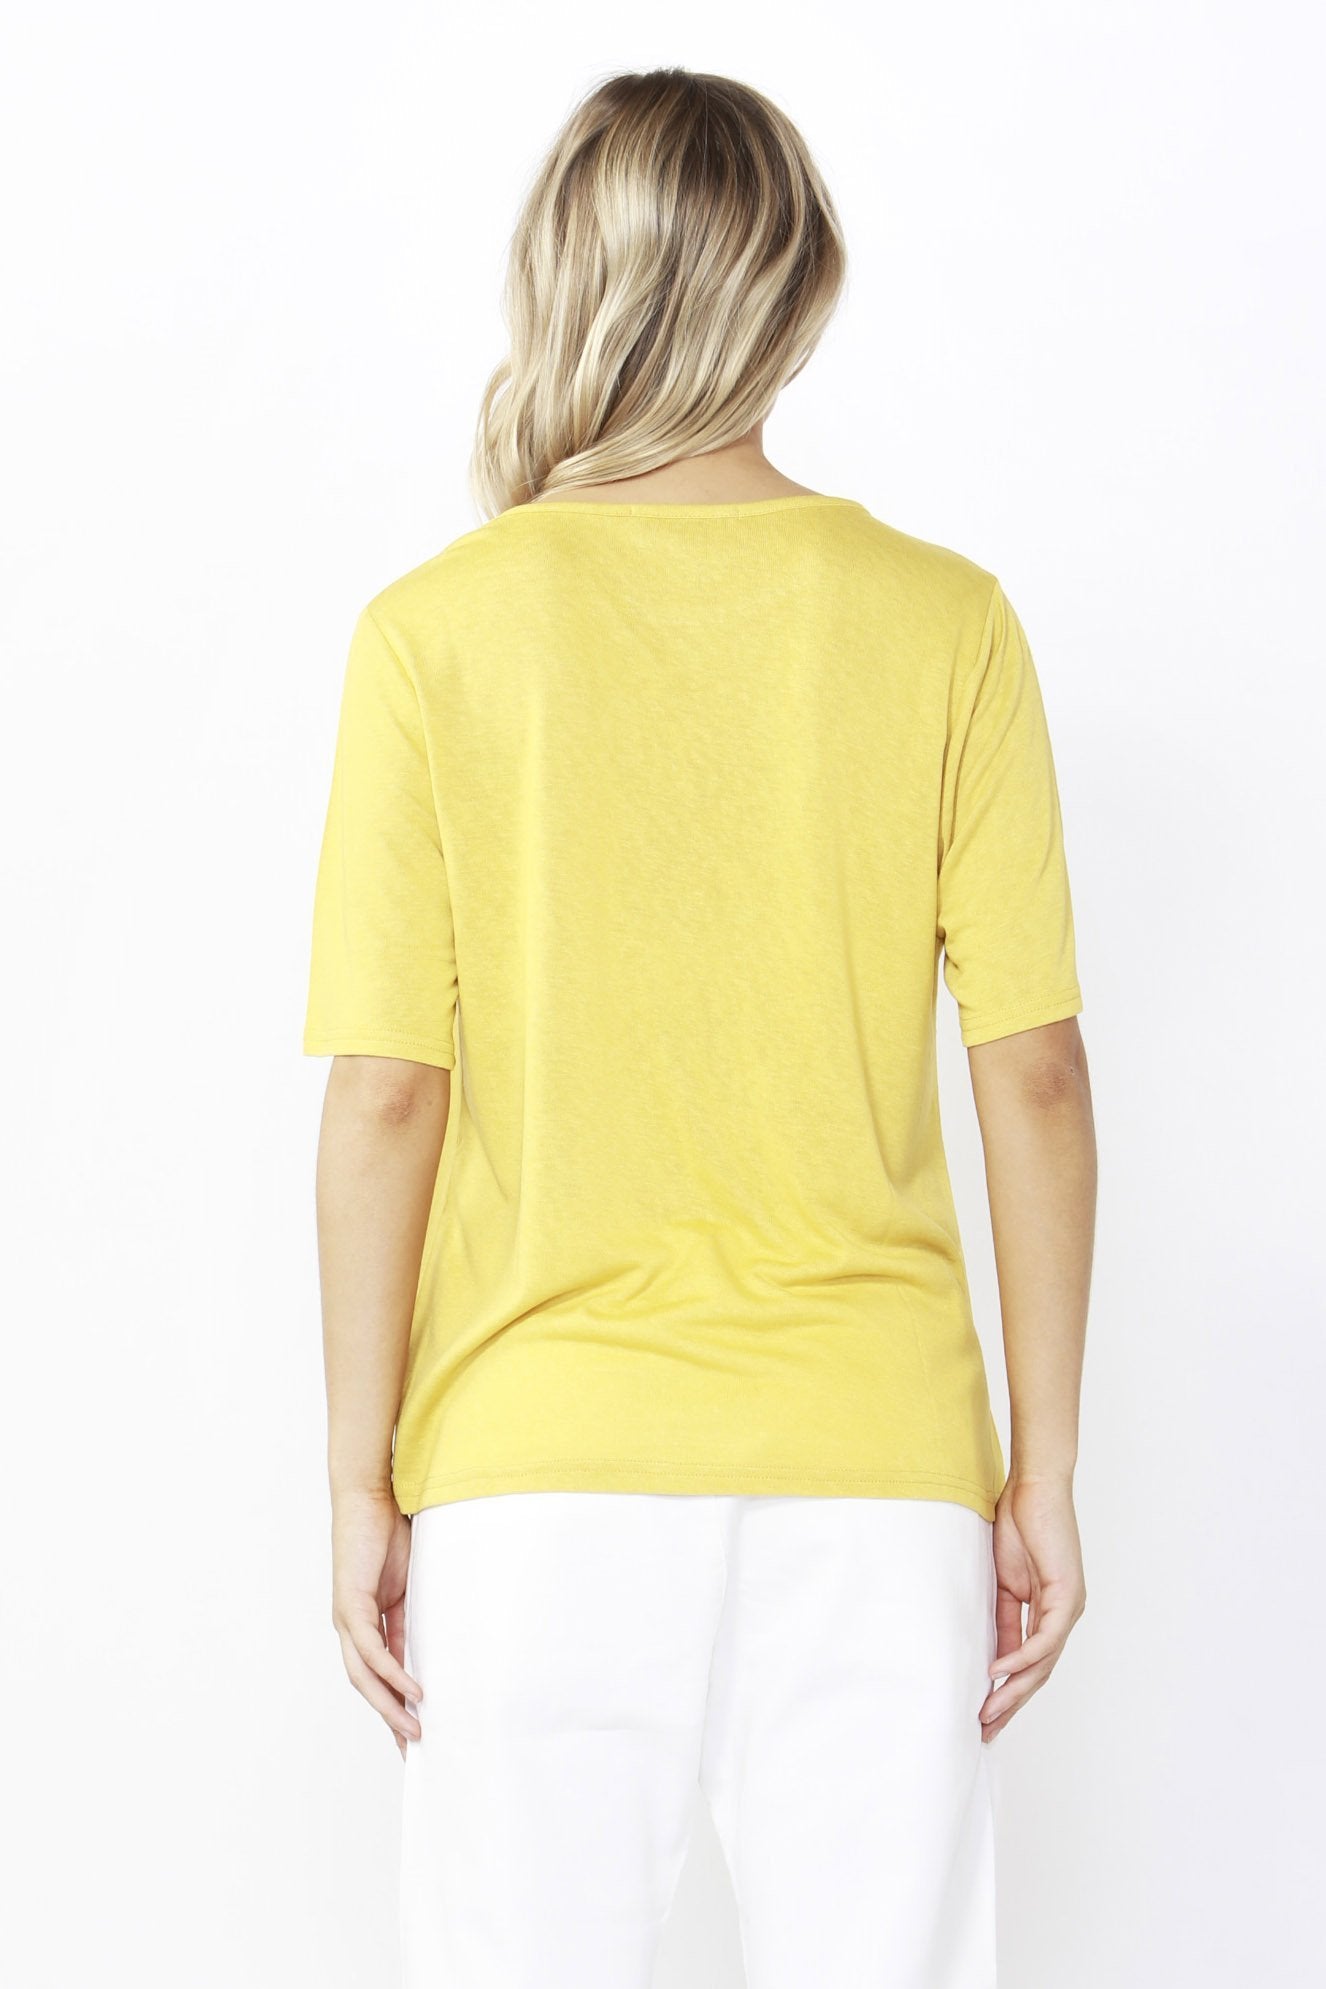 Betty Basics Los Angeles Tee in Daffodil Yellow Size 8 ONLY - Hey Sara